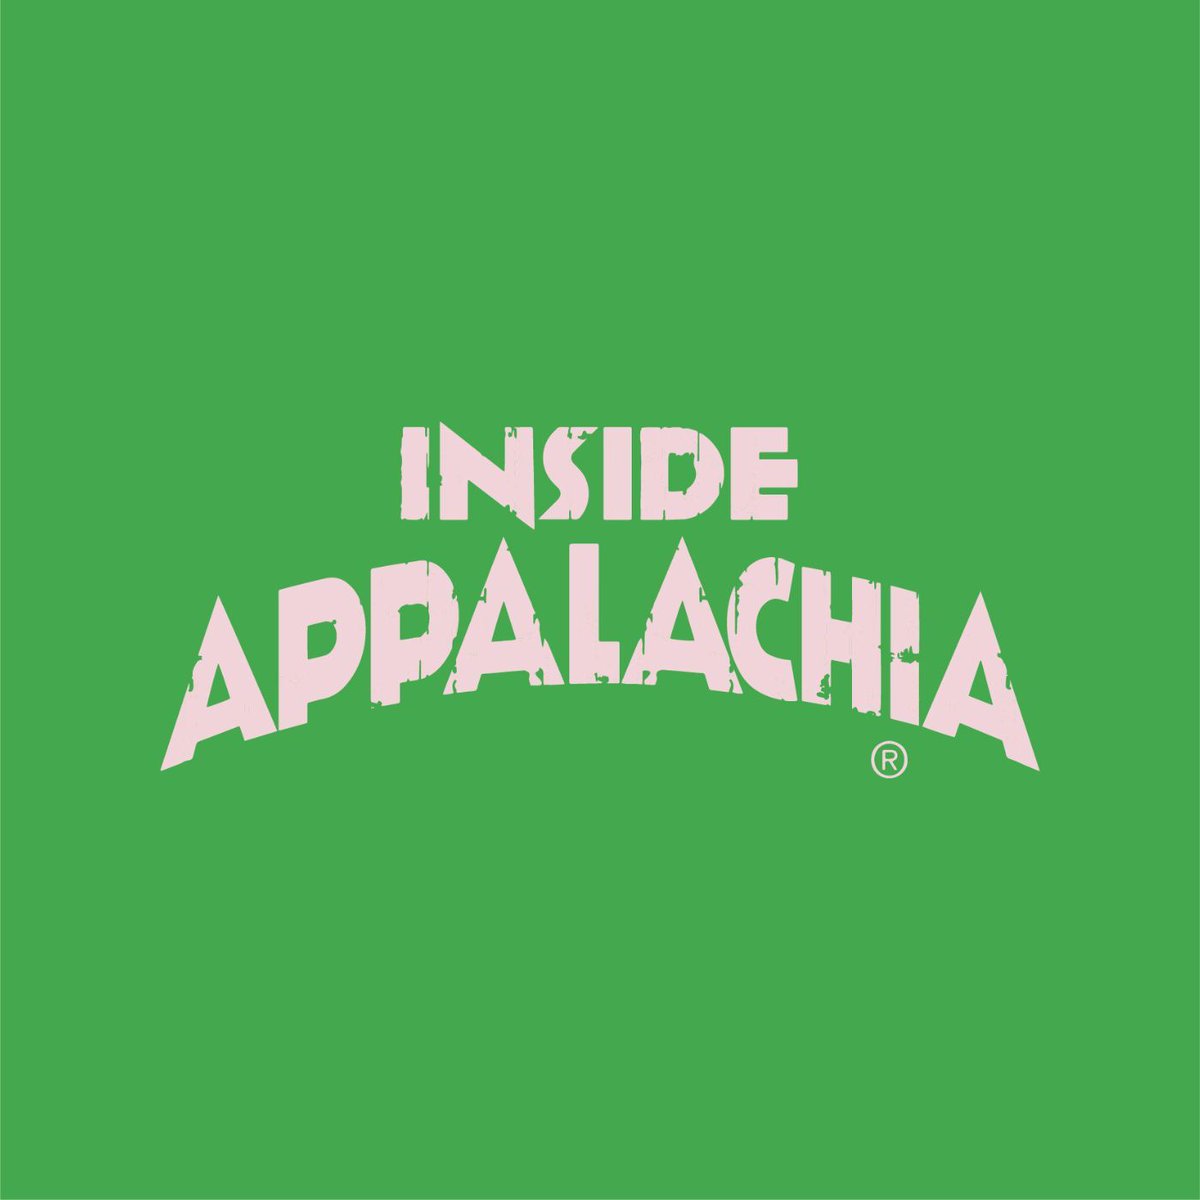 This week on #InsideAppalachia 🌄, rock climbers w/disabilities have found a home in KY’s Red River Gorge. Climbers have also been working to make WV’s New River Gorge more inclusive. And we meet a master craftsman of whitewater paddles. Listen SUNDAY at 7AM & 6PM on @wvpublic.